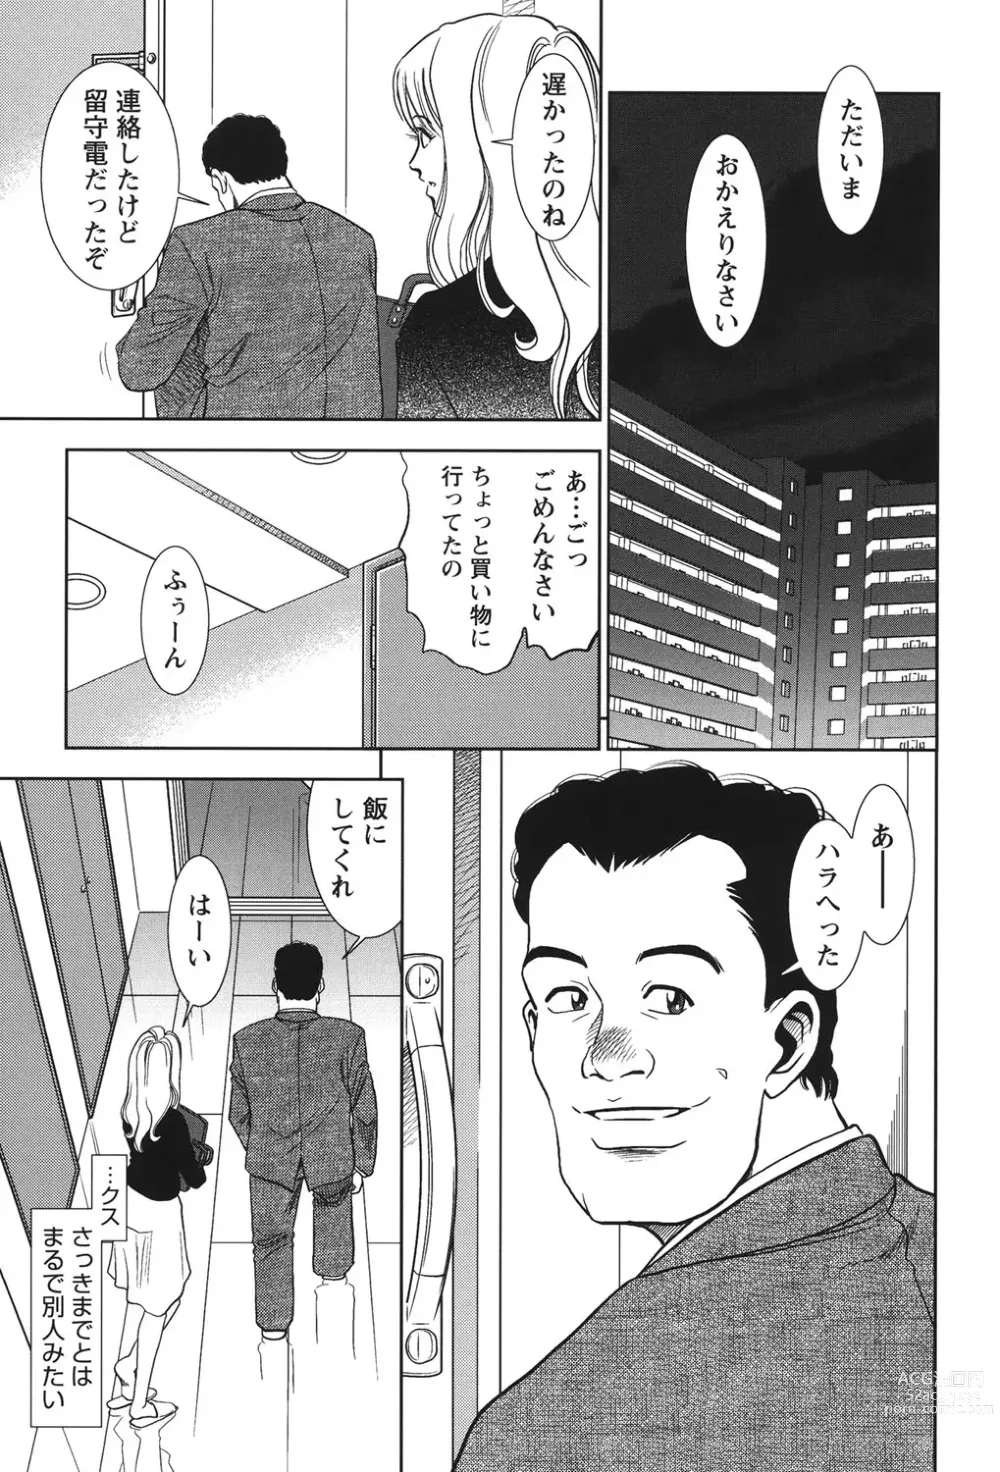 Page 208 of manga Haitoku no Meikyuu - a married woman got lost in the labyrinth of immorality